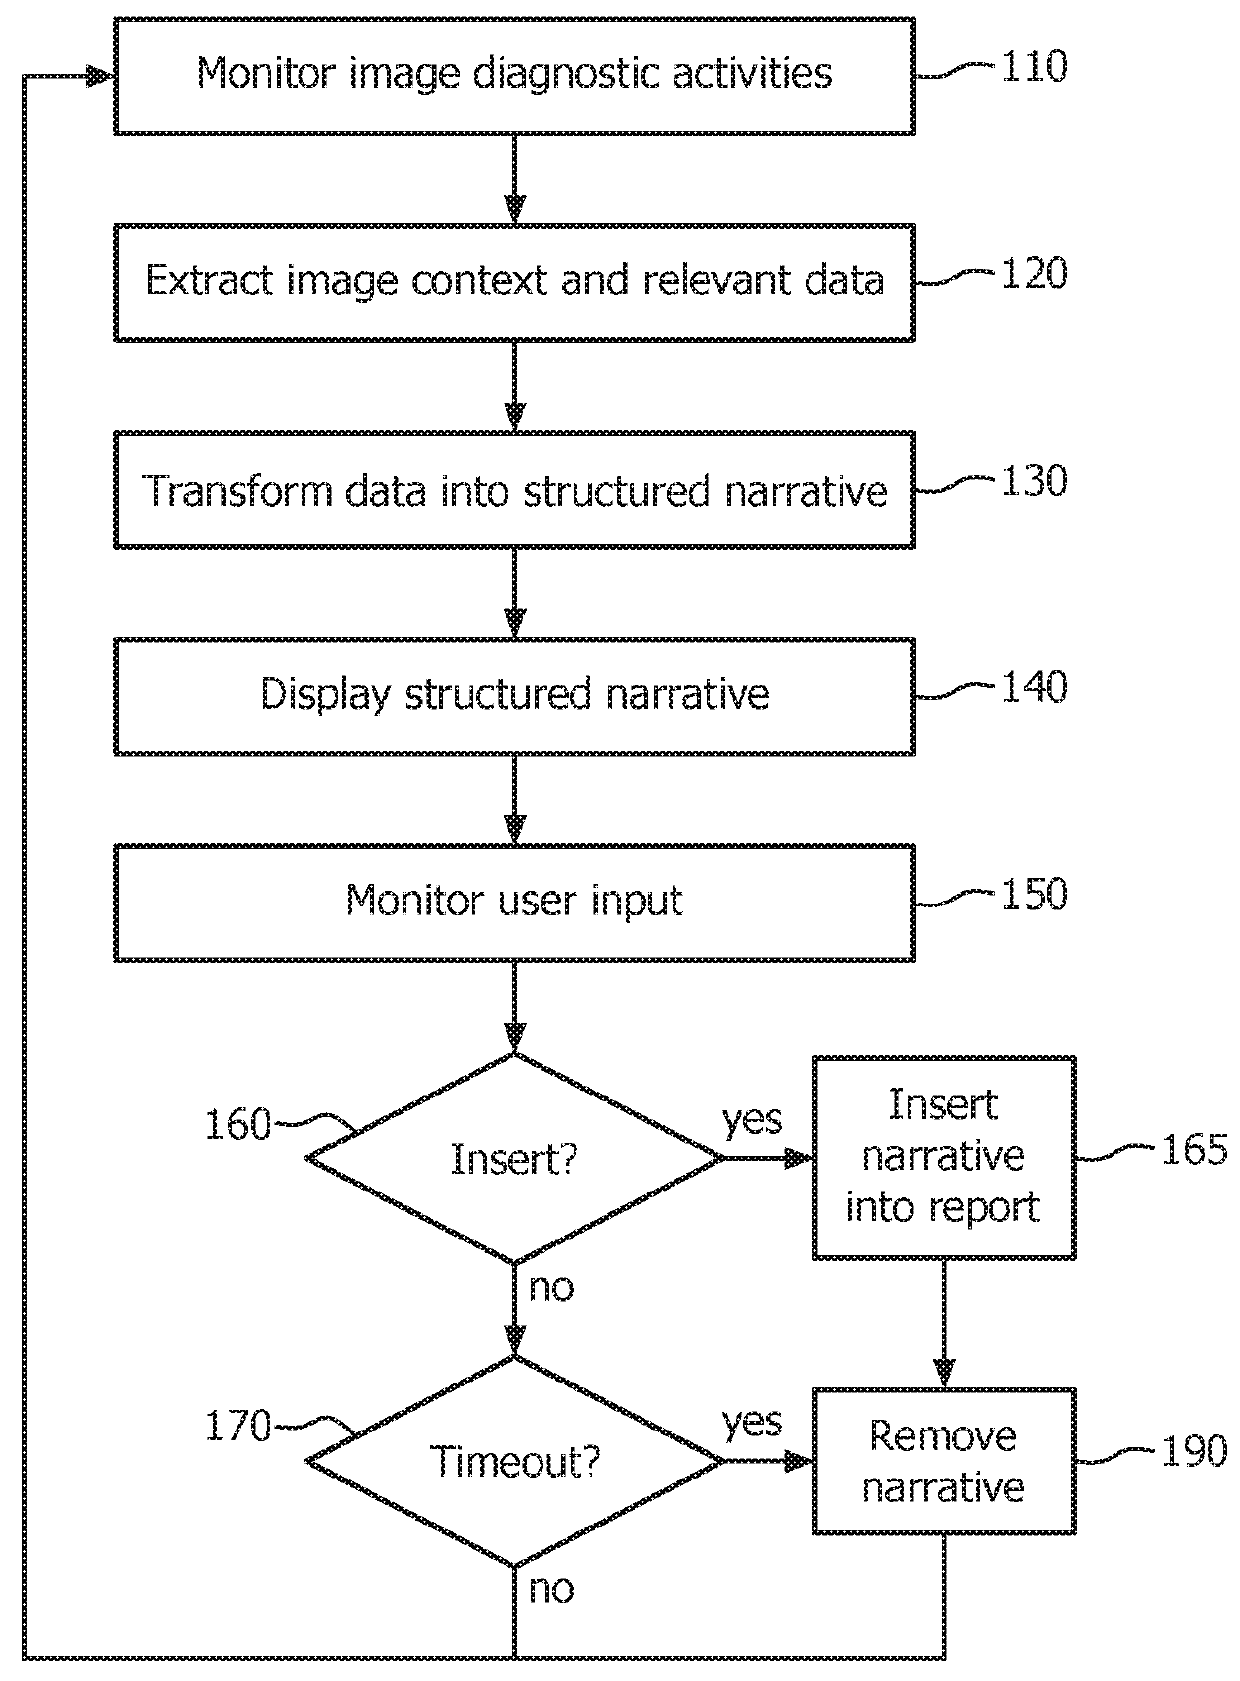 Contextual creation of report content for radiology reporting